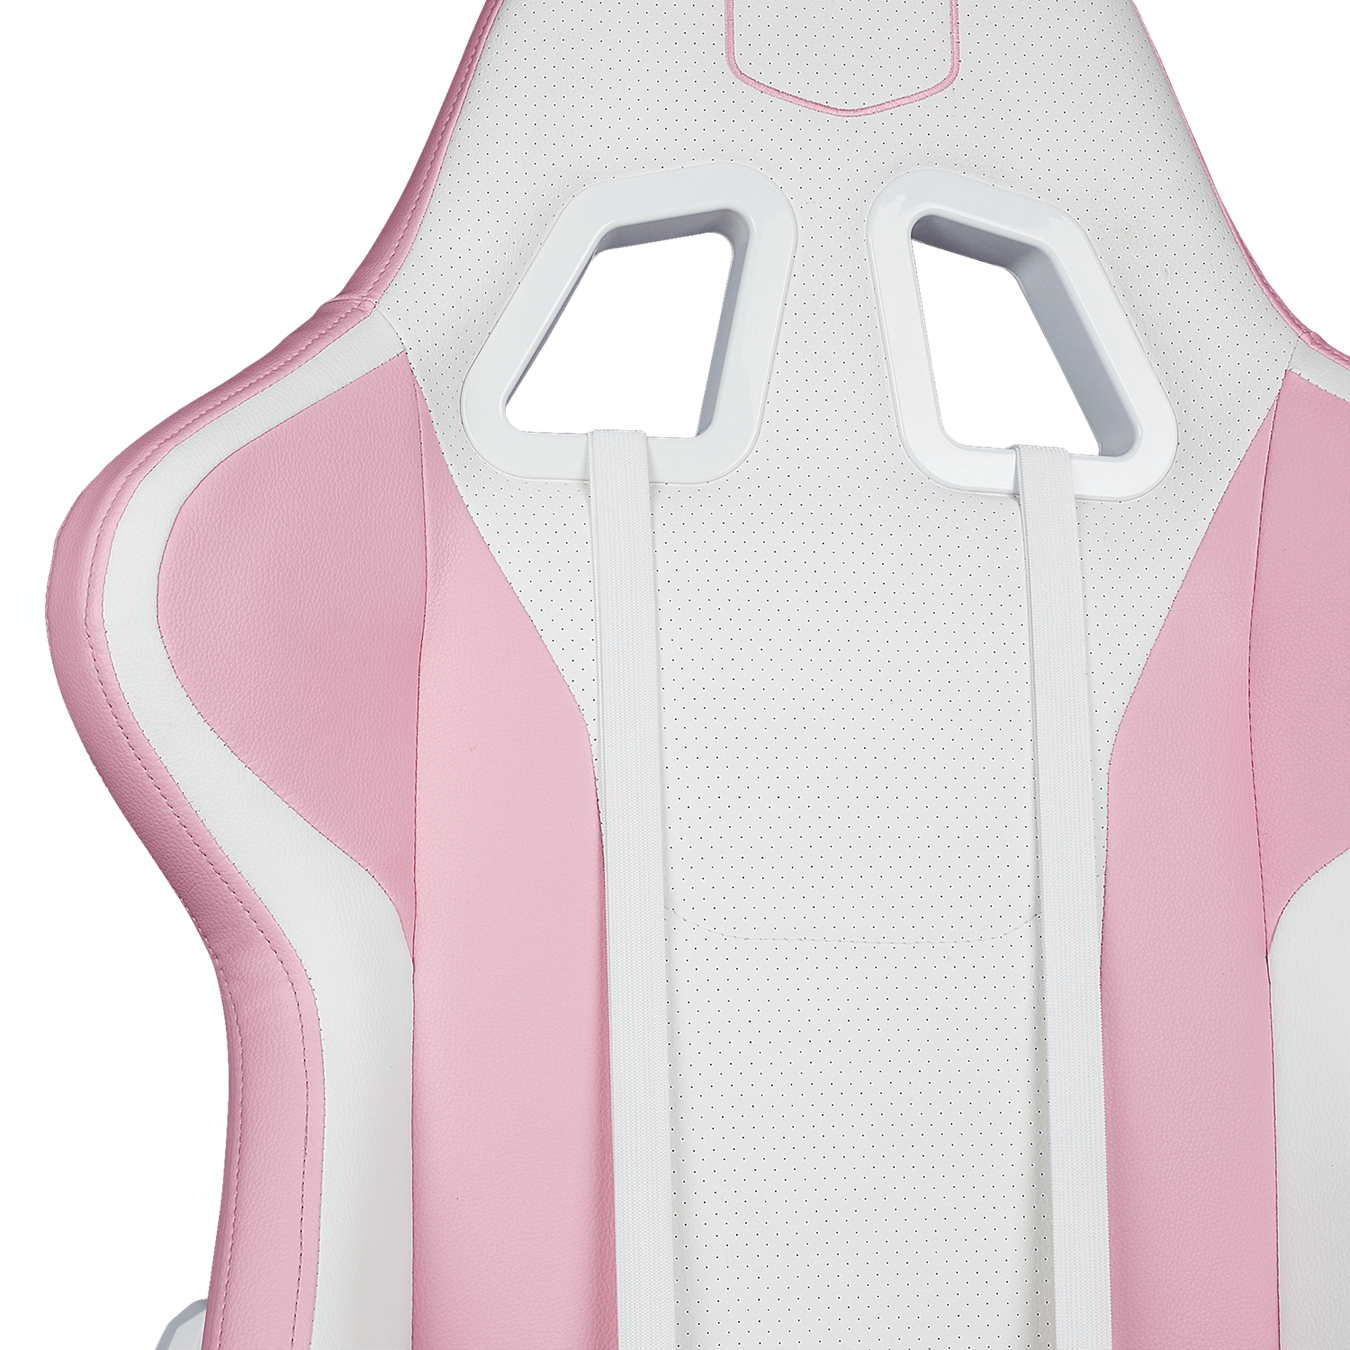 Caliber R1S Rose White Edition Gaming Chair - The breathable PU provides maximum comfort for all body types and keeps you feeling cool and energized at all times.